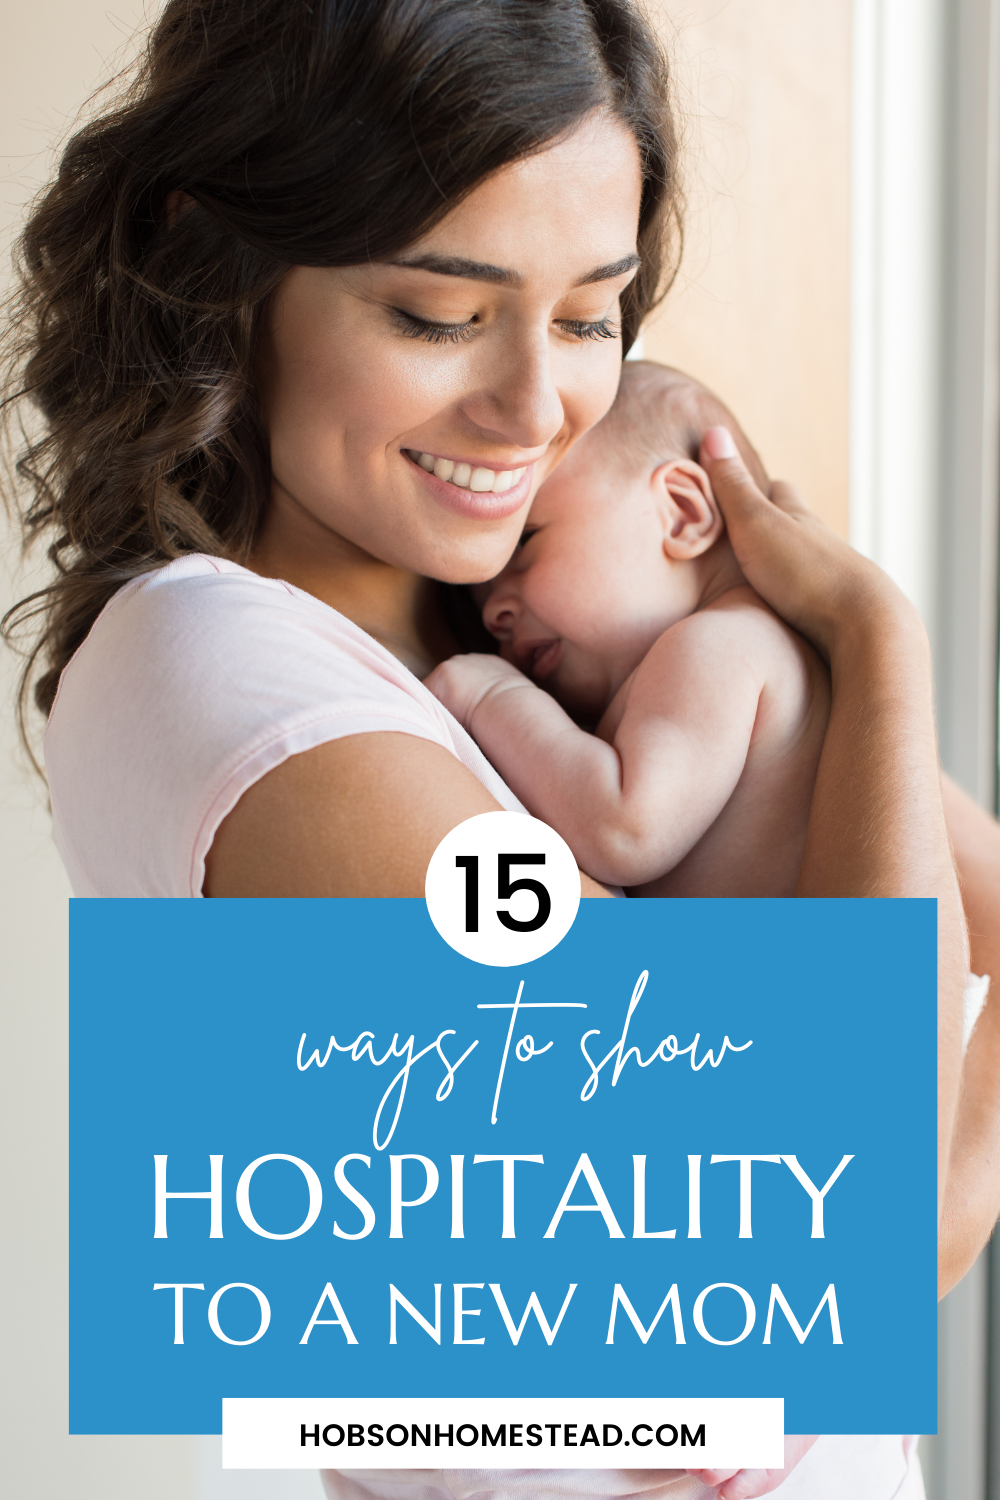 Consider these unique, practical and thoughtful ways to show hospitality and encouragement to a new mom.